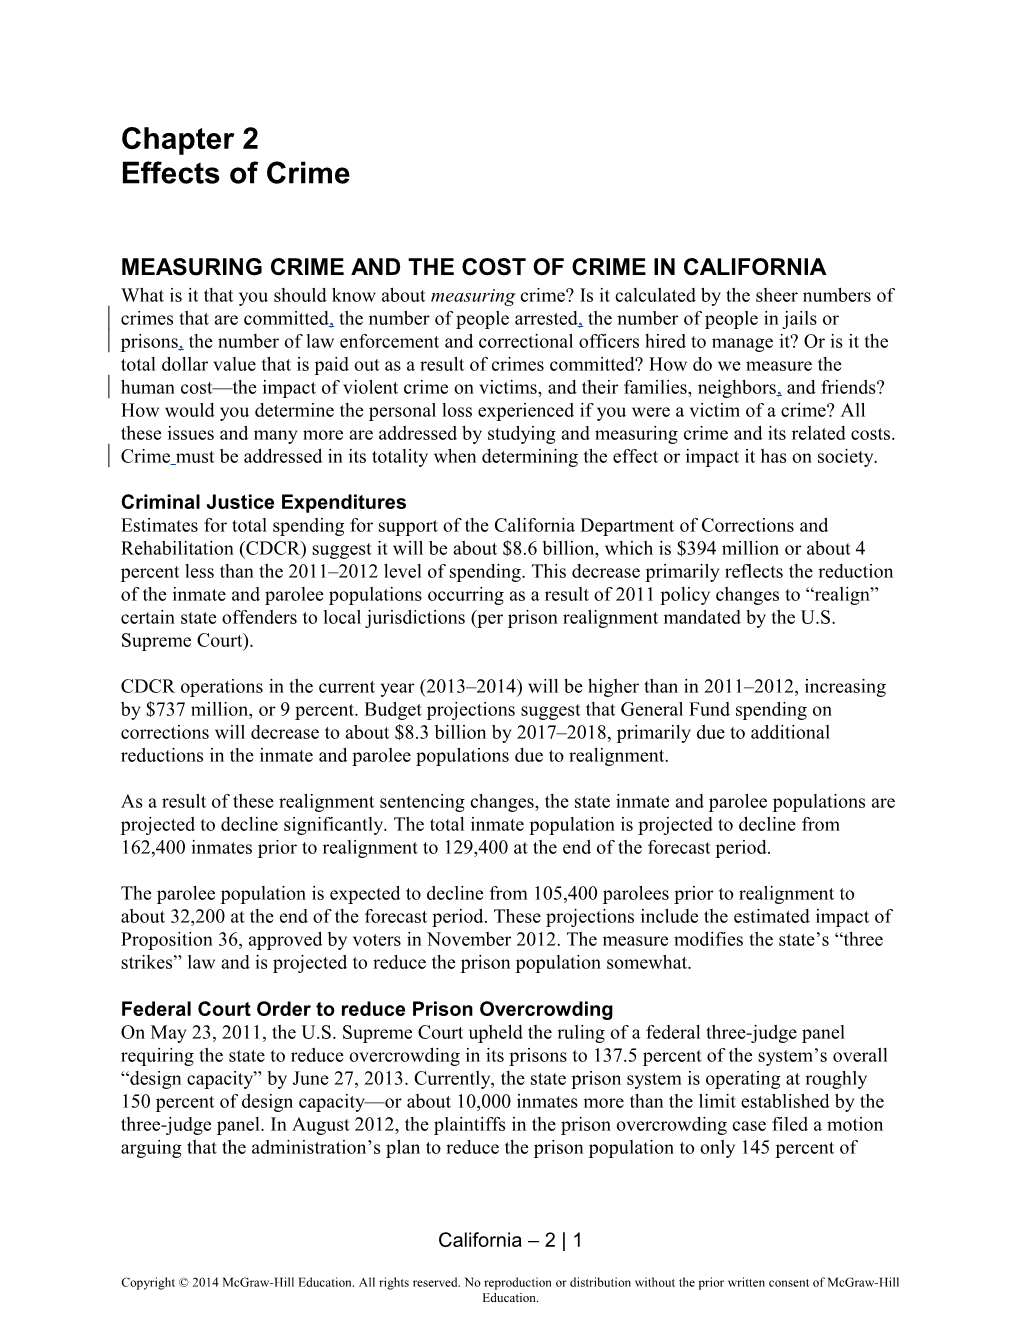 Measuring Crime and the Cost of Crime in California